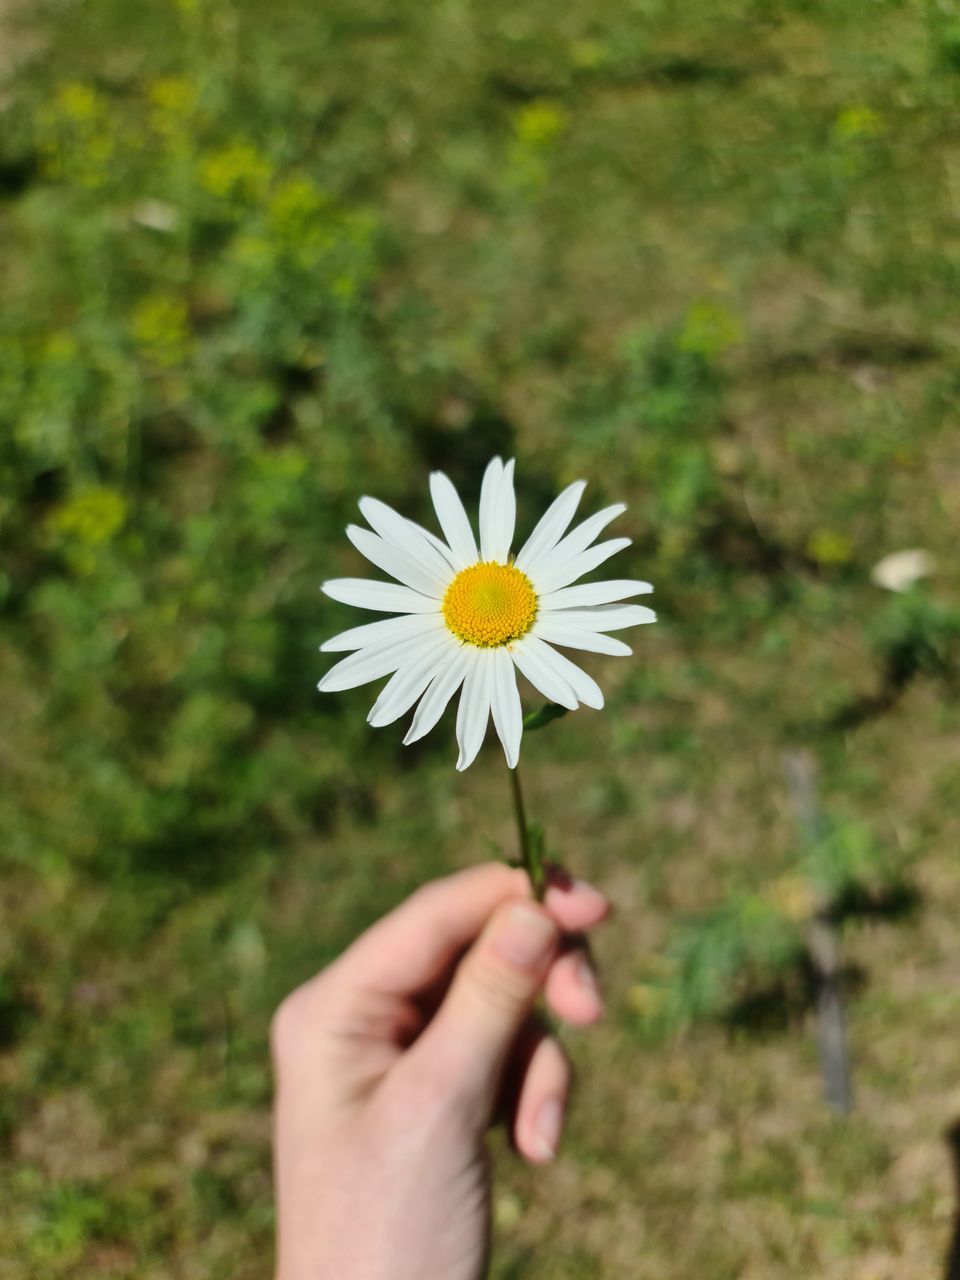 plant, flower, hand, flowering plant, freshness, grass, nature, fragility, beauty in nature, one person, holding, green, daisy, growth, flower head, close-up, meadow, yellow, petal, day, focus on foreground, inflorescence, outdoors, adult, wildflower, selective focus, leaf, white, pollen, sunlight